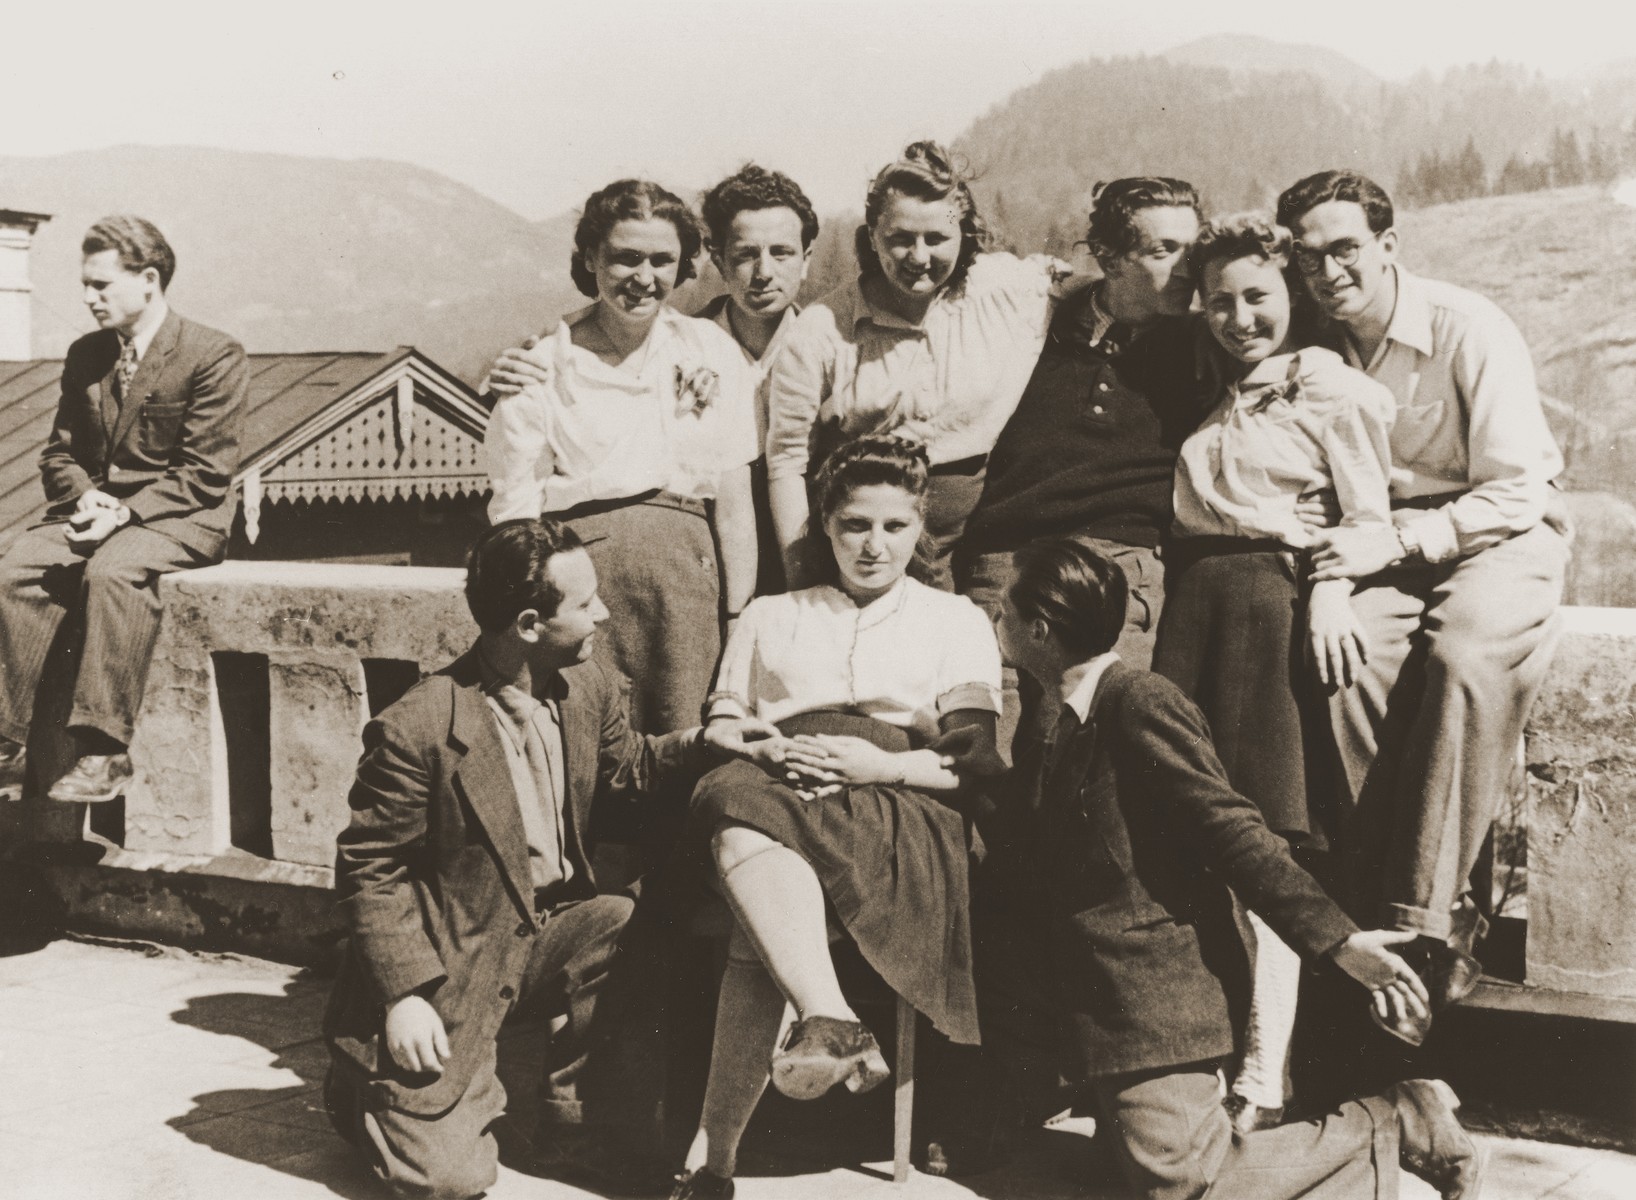 Group portrait of Jewish DP college students from Munich on an excursion to Berchtesgaden.

Janka Sklarczyk from Sloniki is on the far left in the white shirt.  Next to her is Horowitz.  Sandor Bauer is at the bottom left.  Stephan Berko is on the far right and Natan Bierman is in the back, third from the right.